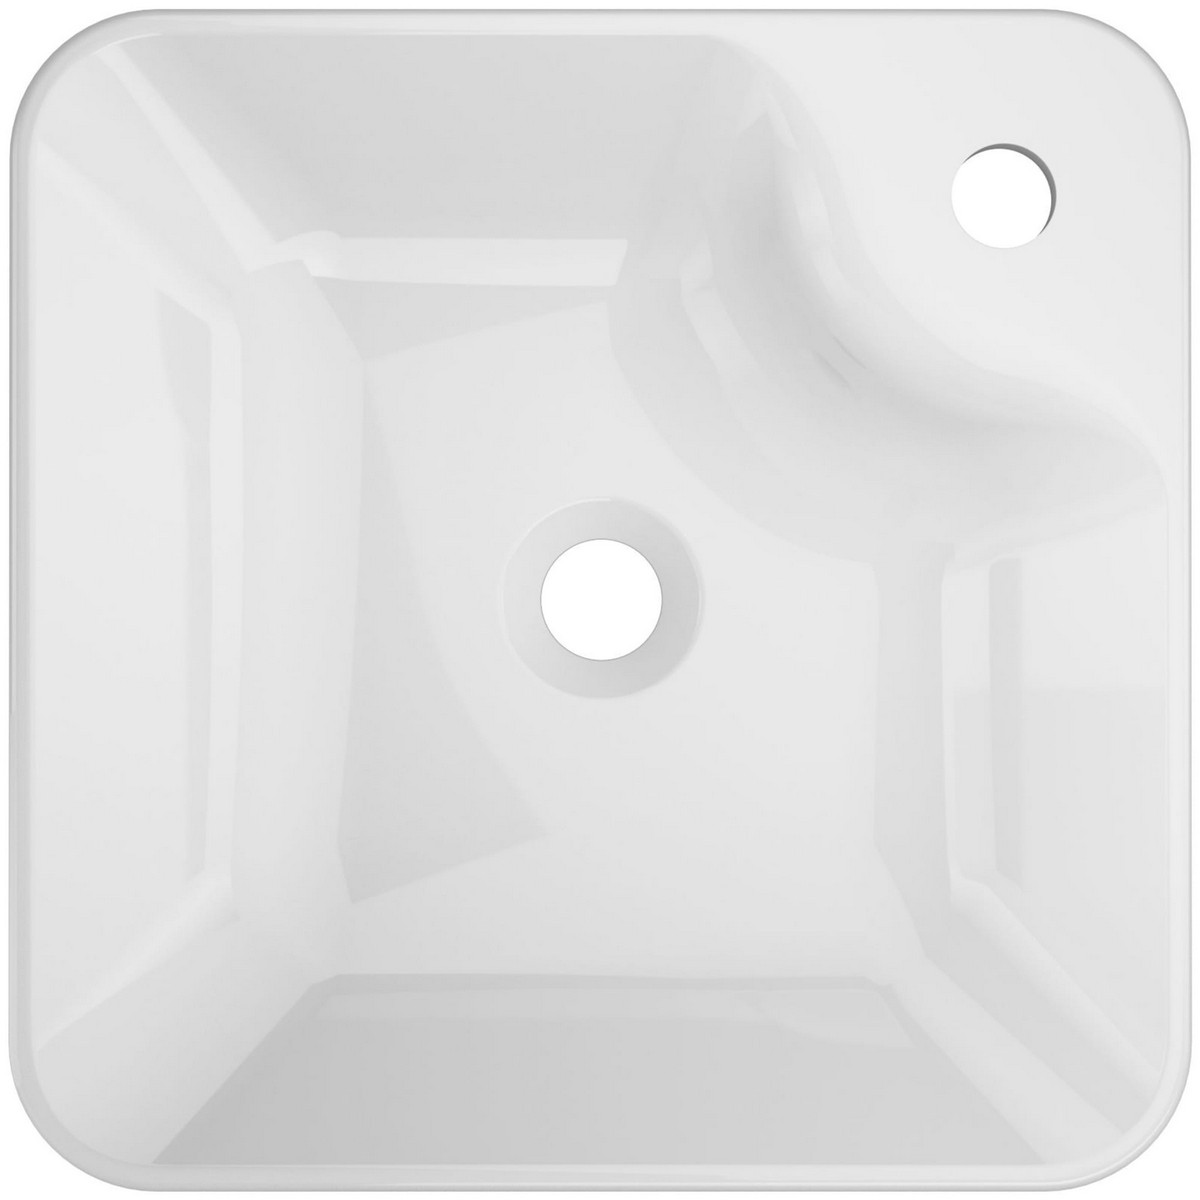 JACUZZI NEV1616G NERINA 15 3/4 INCH SOLID SURFACE VESSEL BATHROOM SINK IN GLOSS WHITE